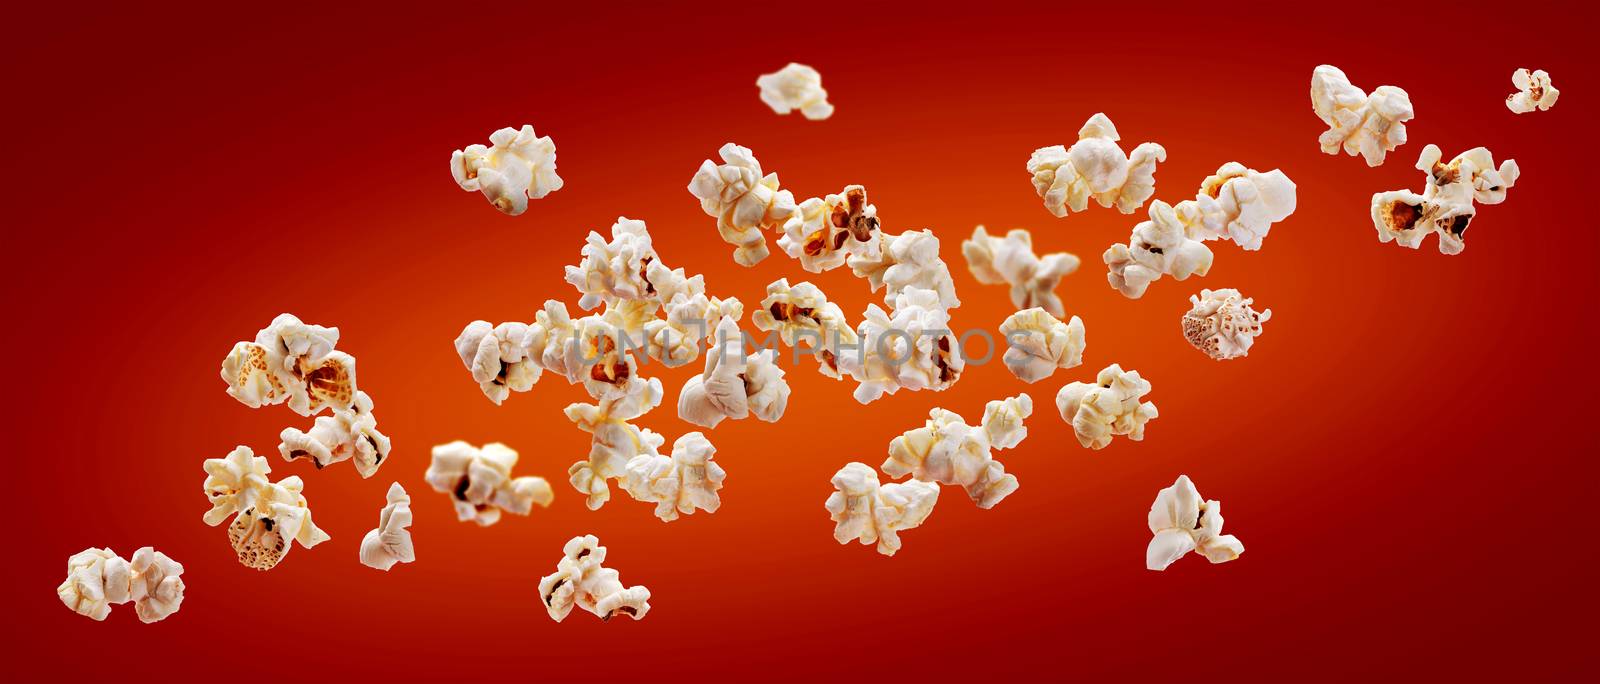 Popcorn isolated on red background. Falling or flying popcorn. Close-up by xamtiw